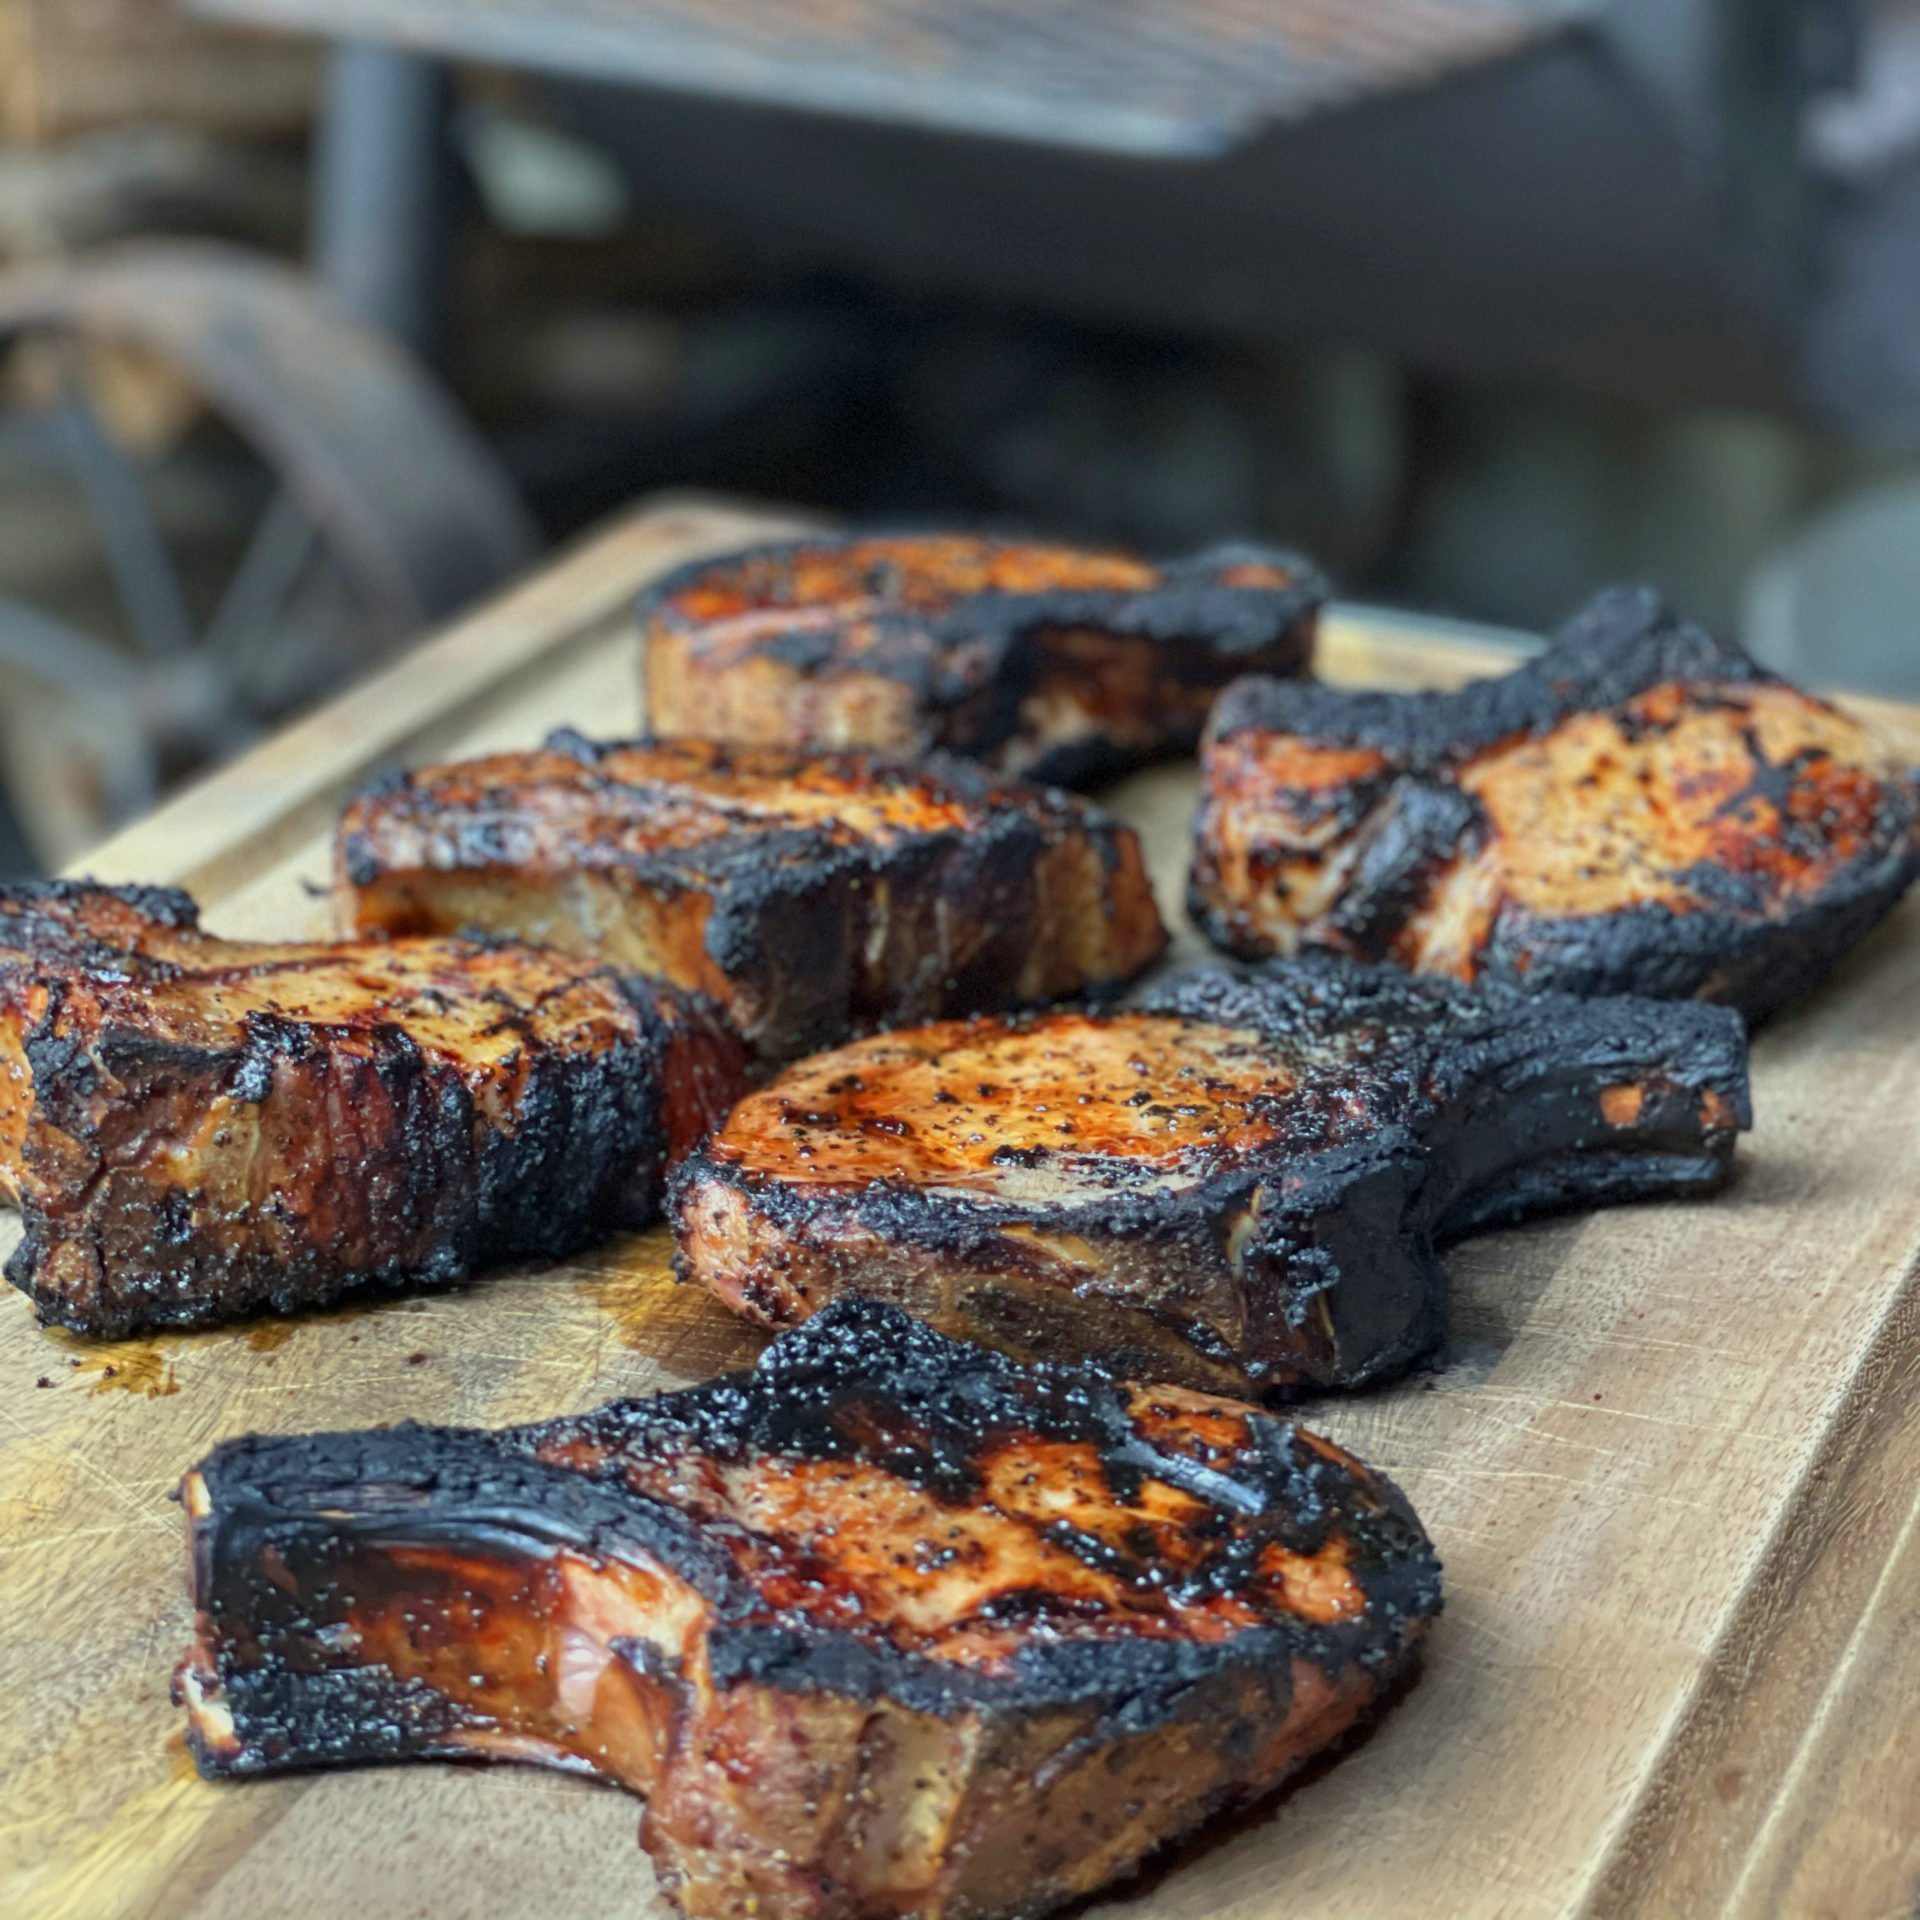 Grilled pork chops on the Yoder Smokers Loaded Wichita